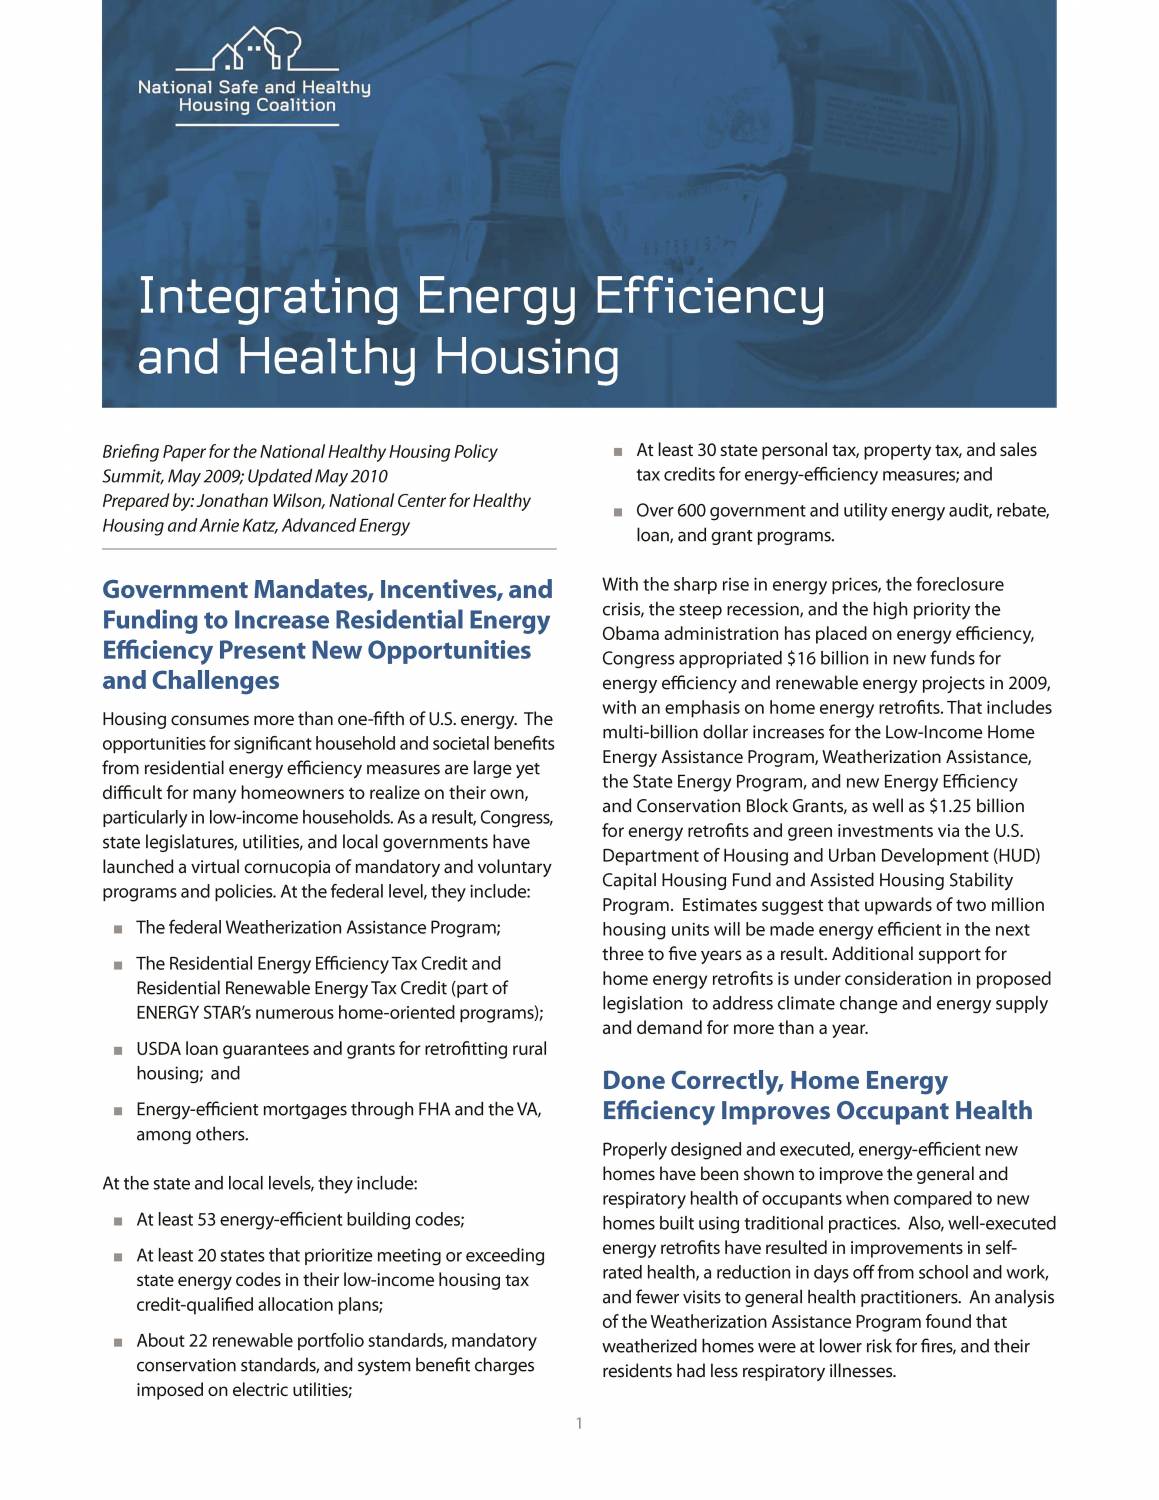 Integrating Energy Efficiency and Healthy Housing